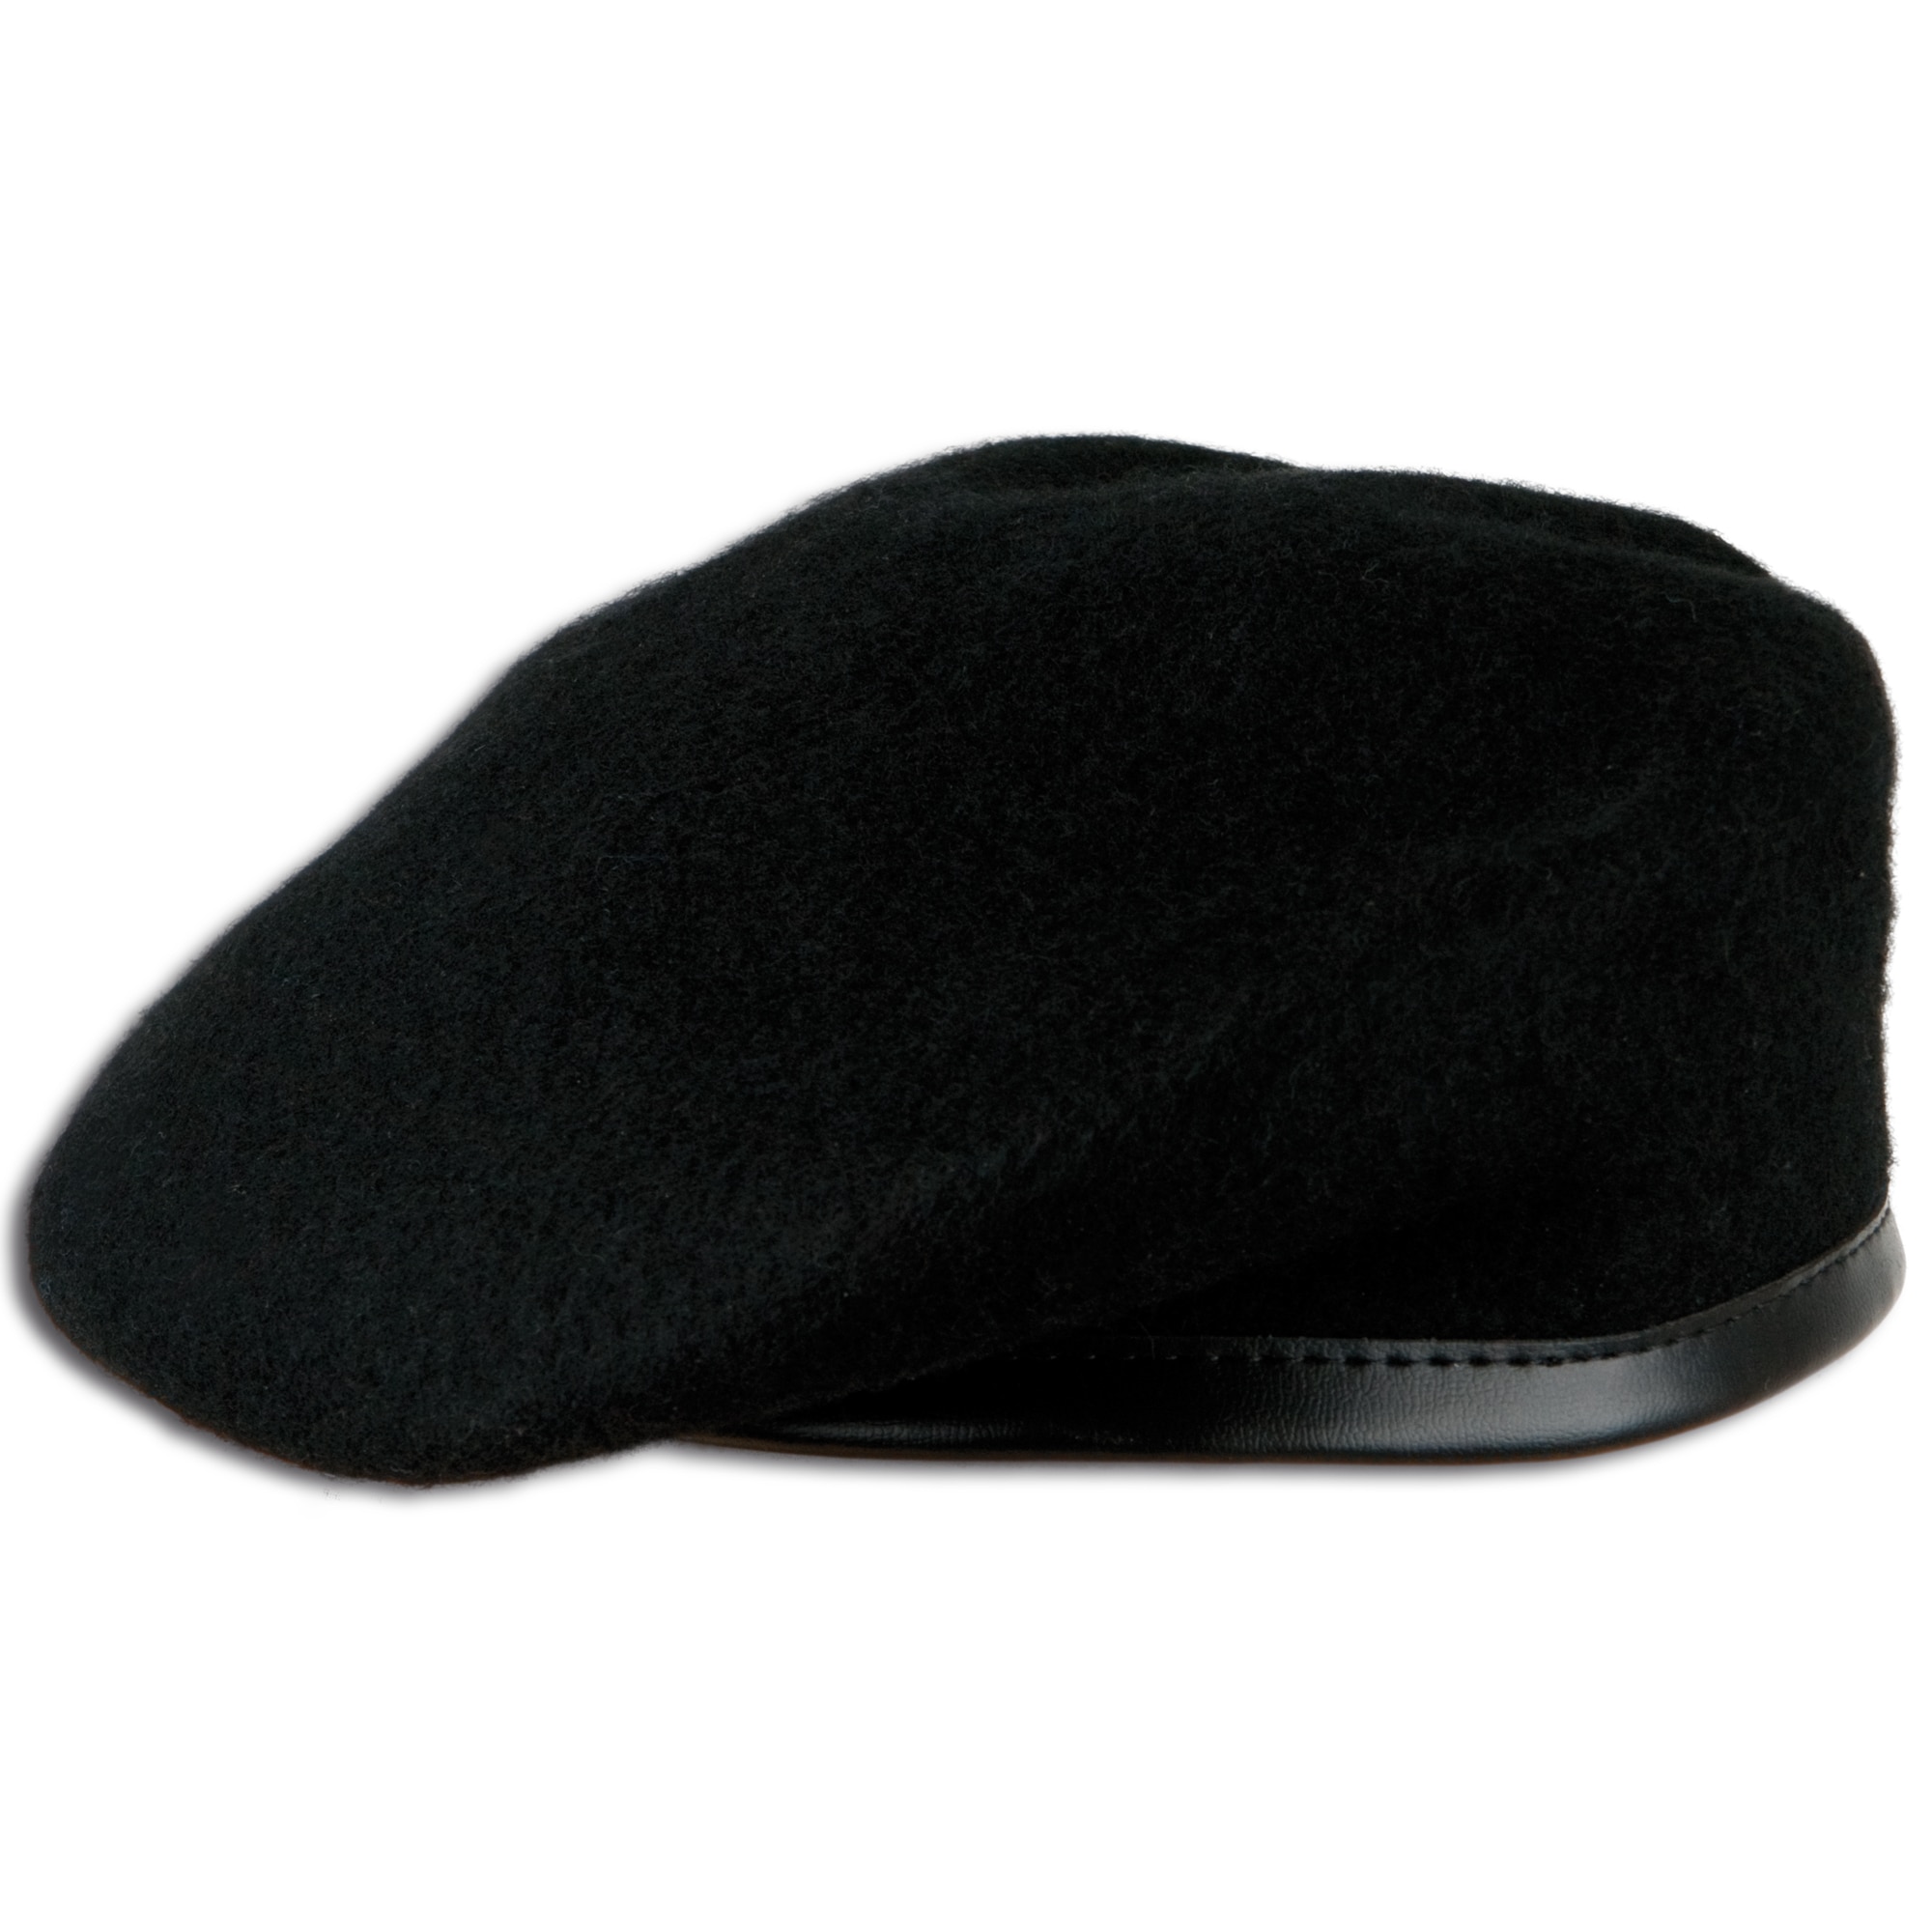 purchase-the-german-army-beret-black-by-asmc